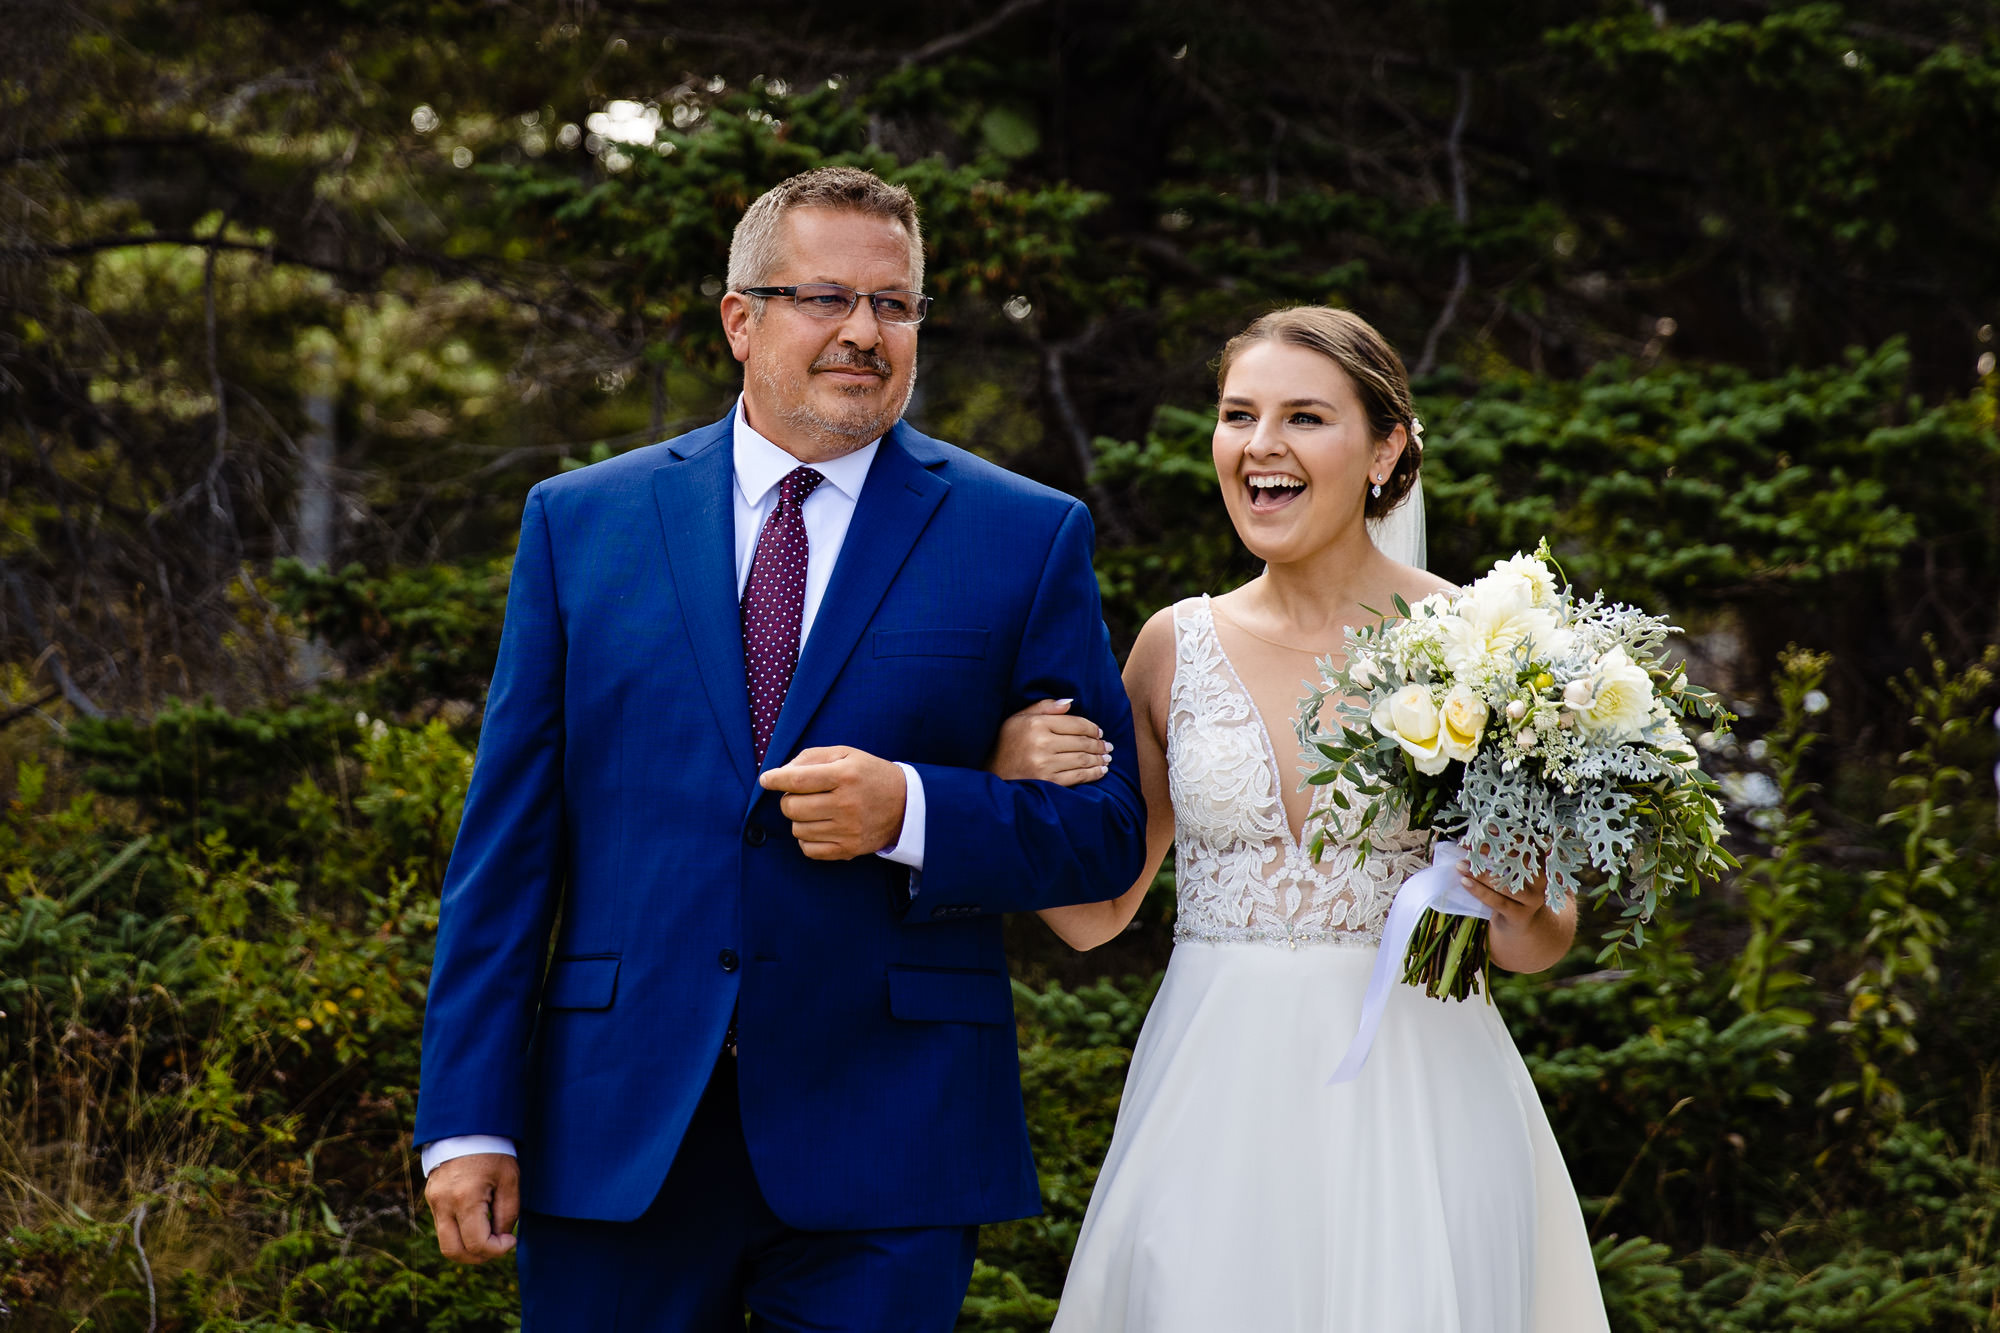 The bride laughs as she walks into her Acadia elopement ceremony